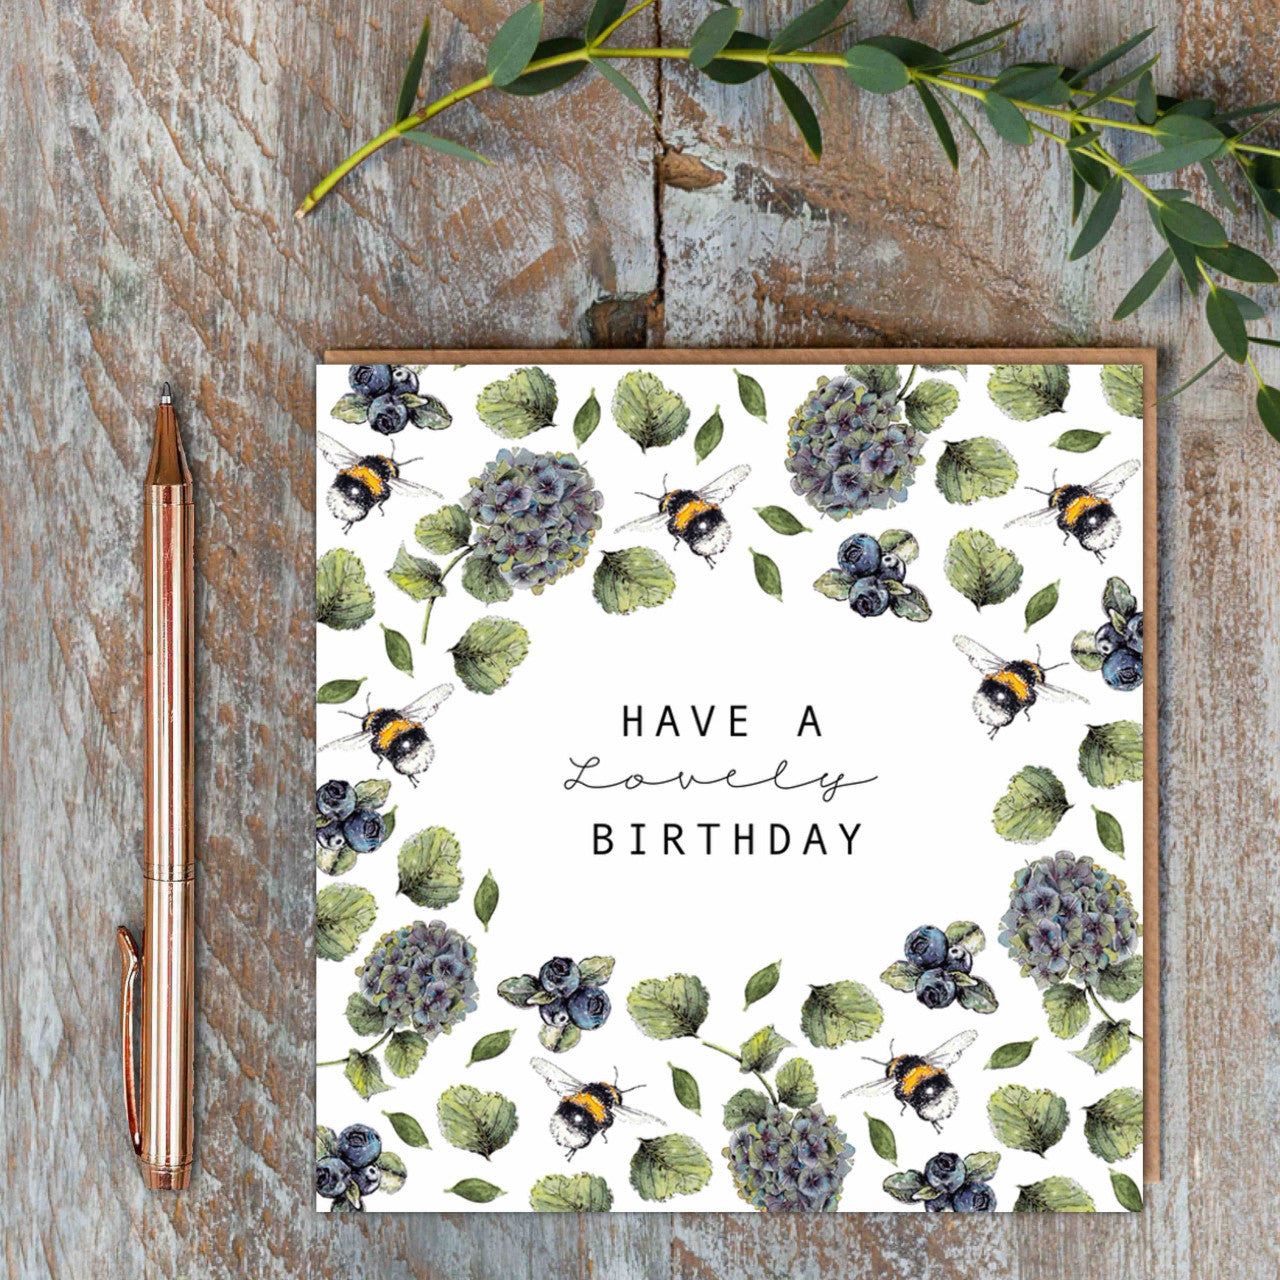 Have a Lovely Birthday Greetings Card